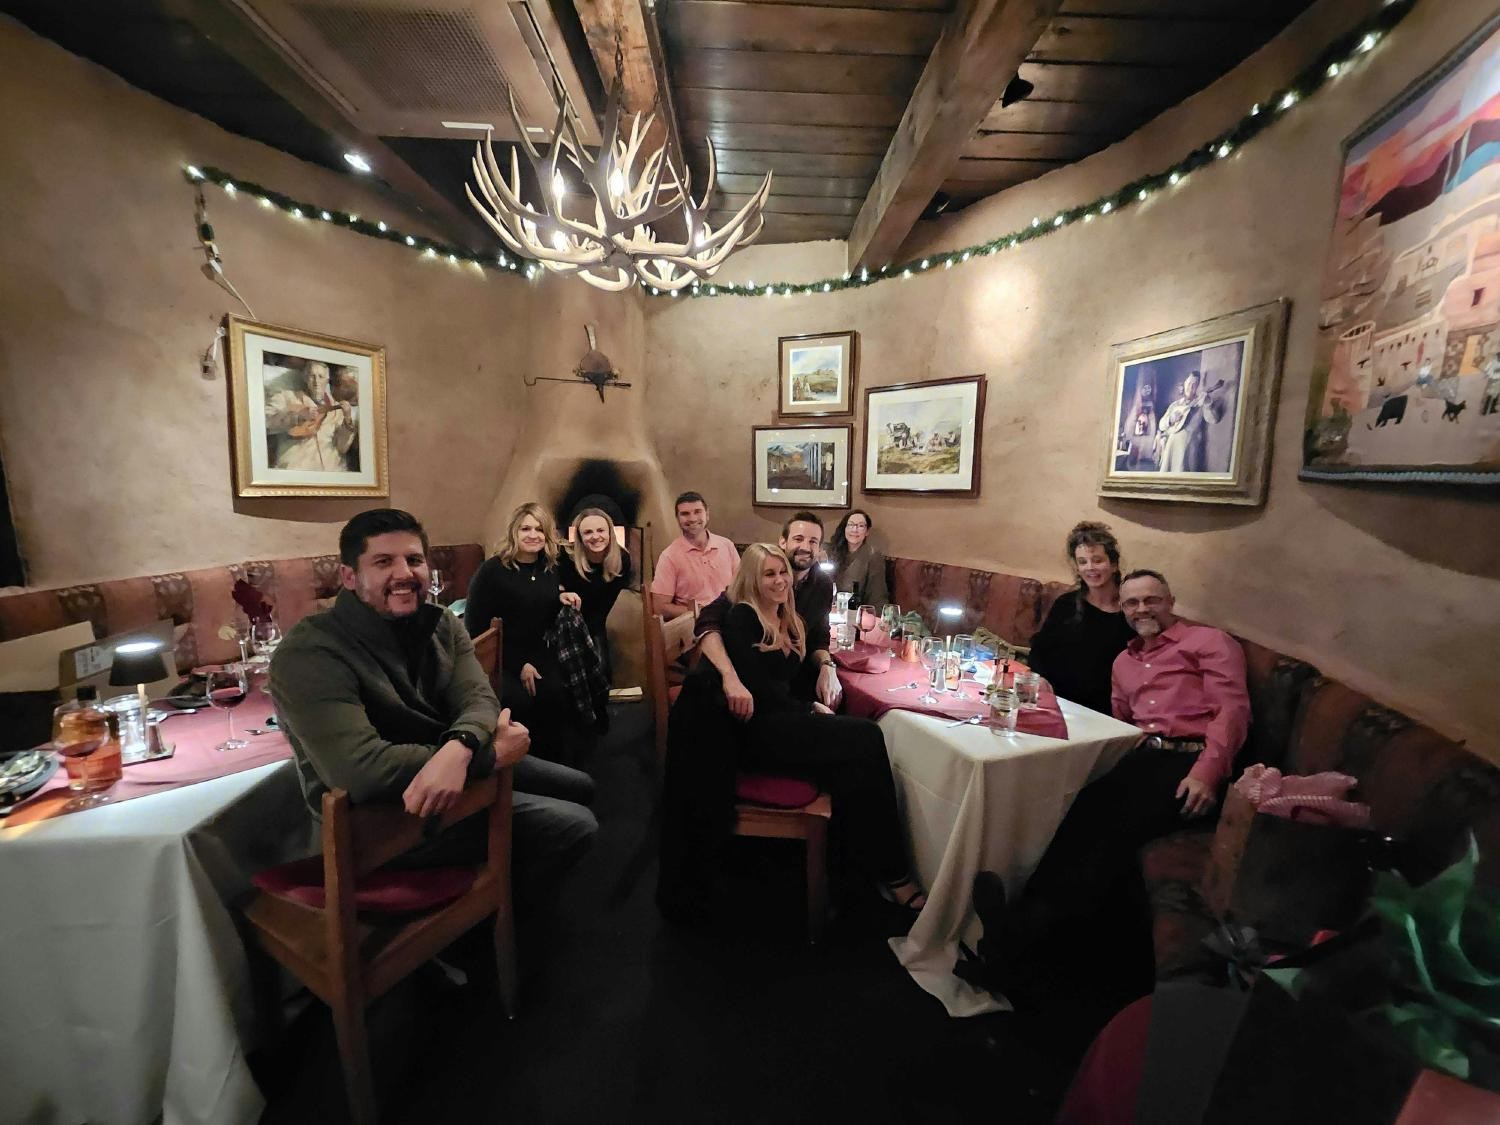 Our Colorado crew wrapped up the year in style! All smiles as they gathered for one of our year-end festivities.